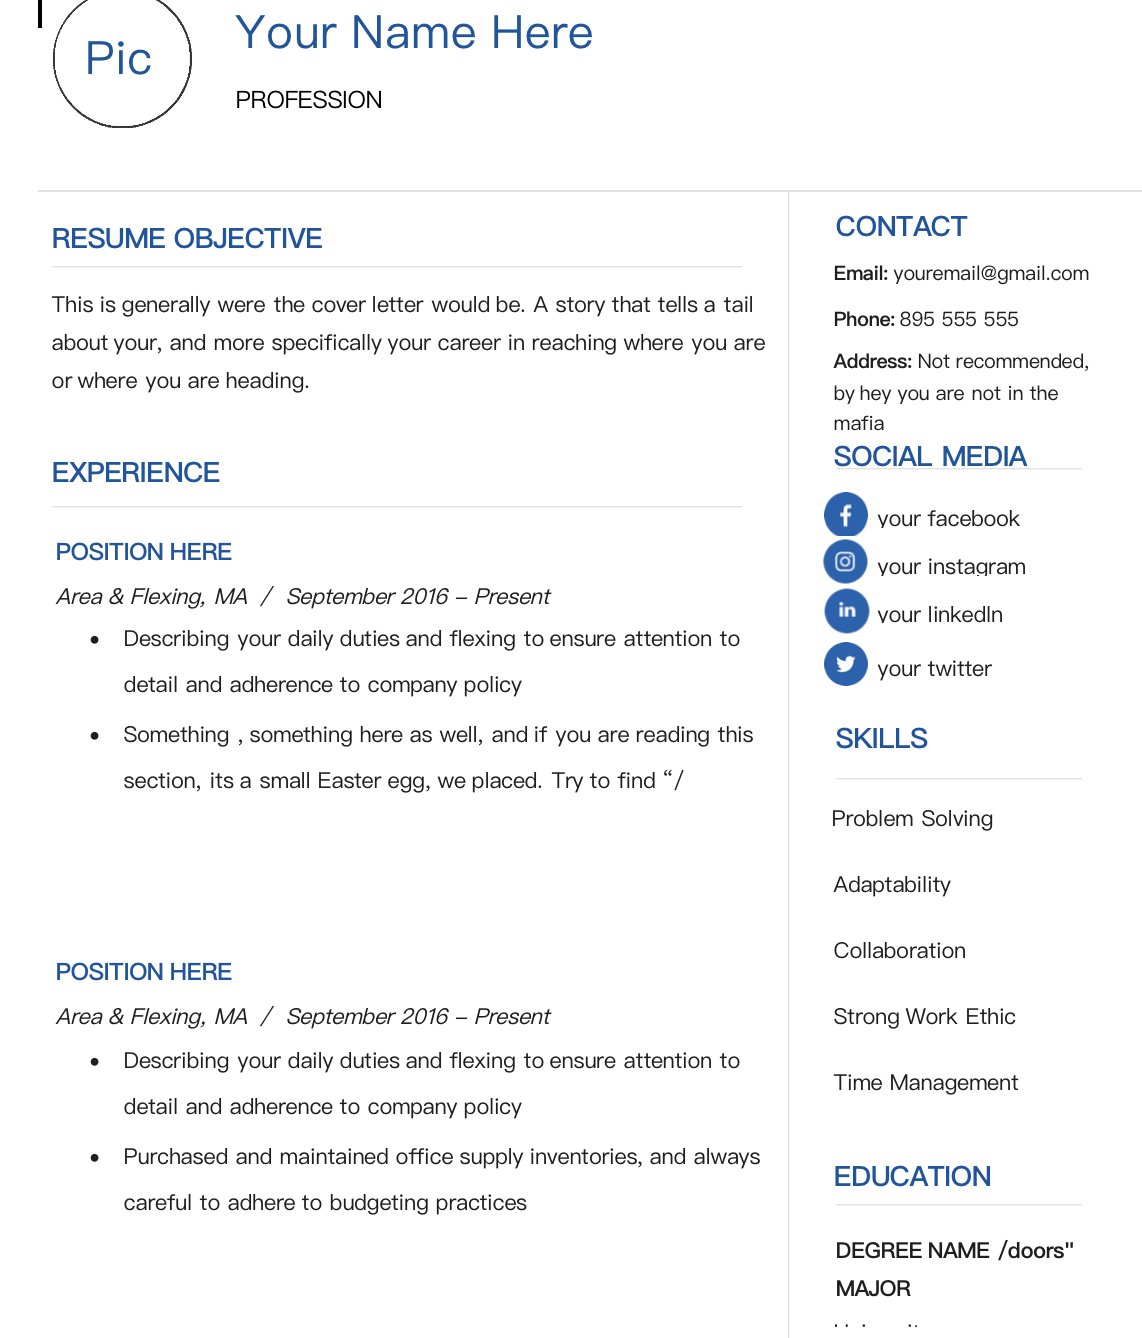 Joblify Connect Resume Image